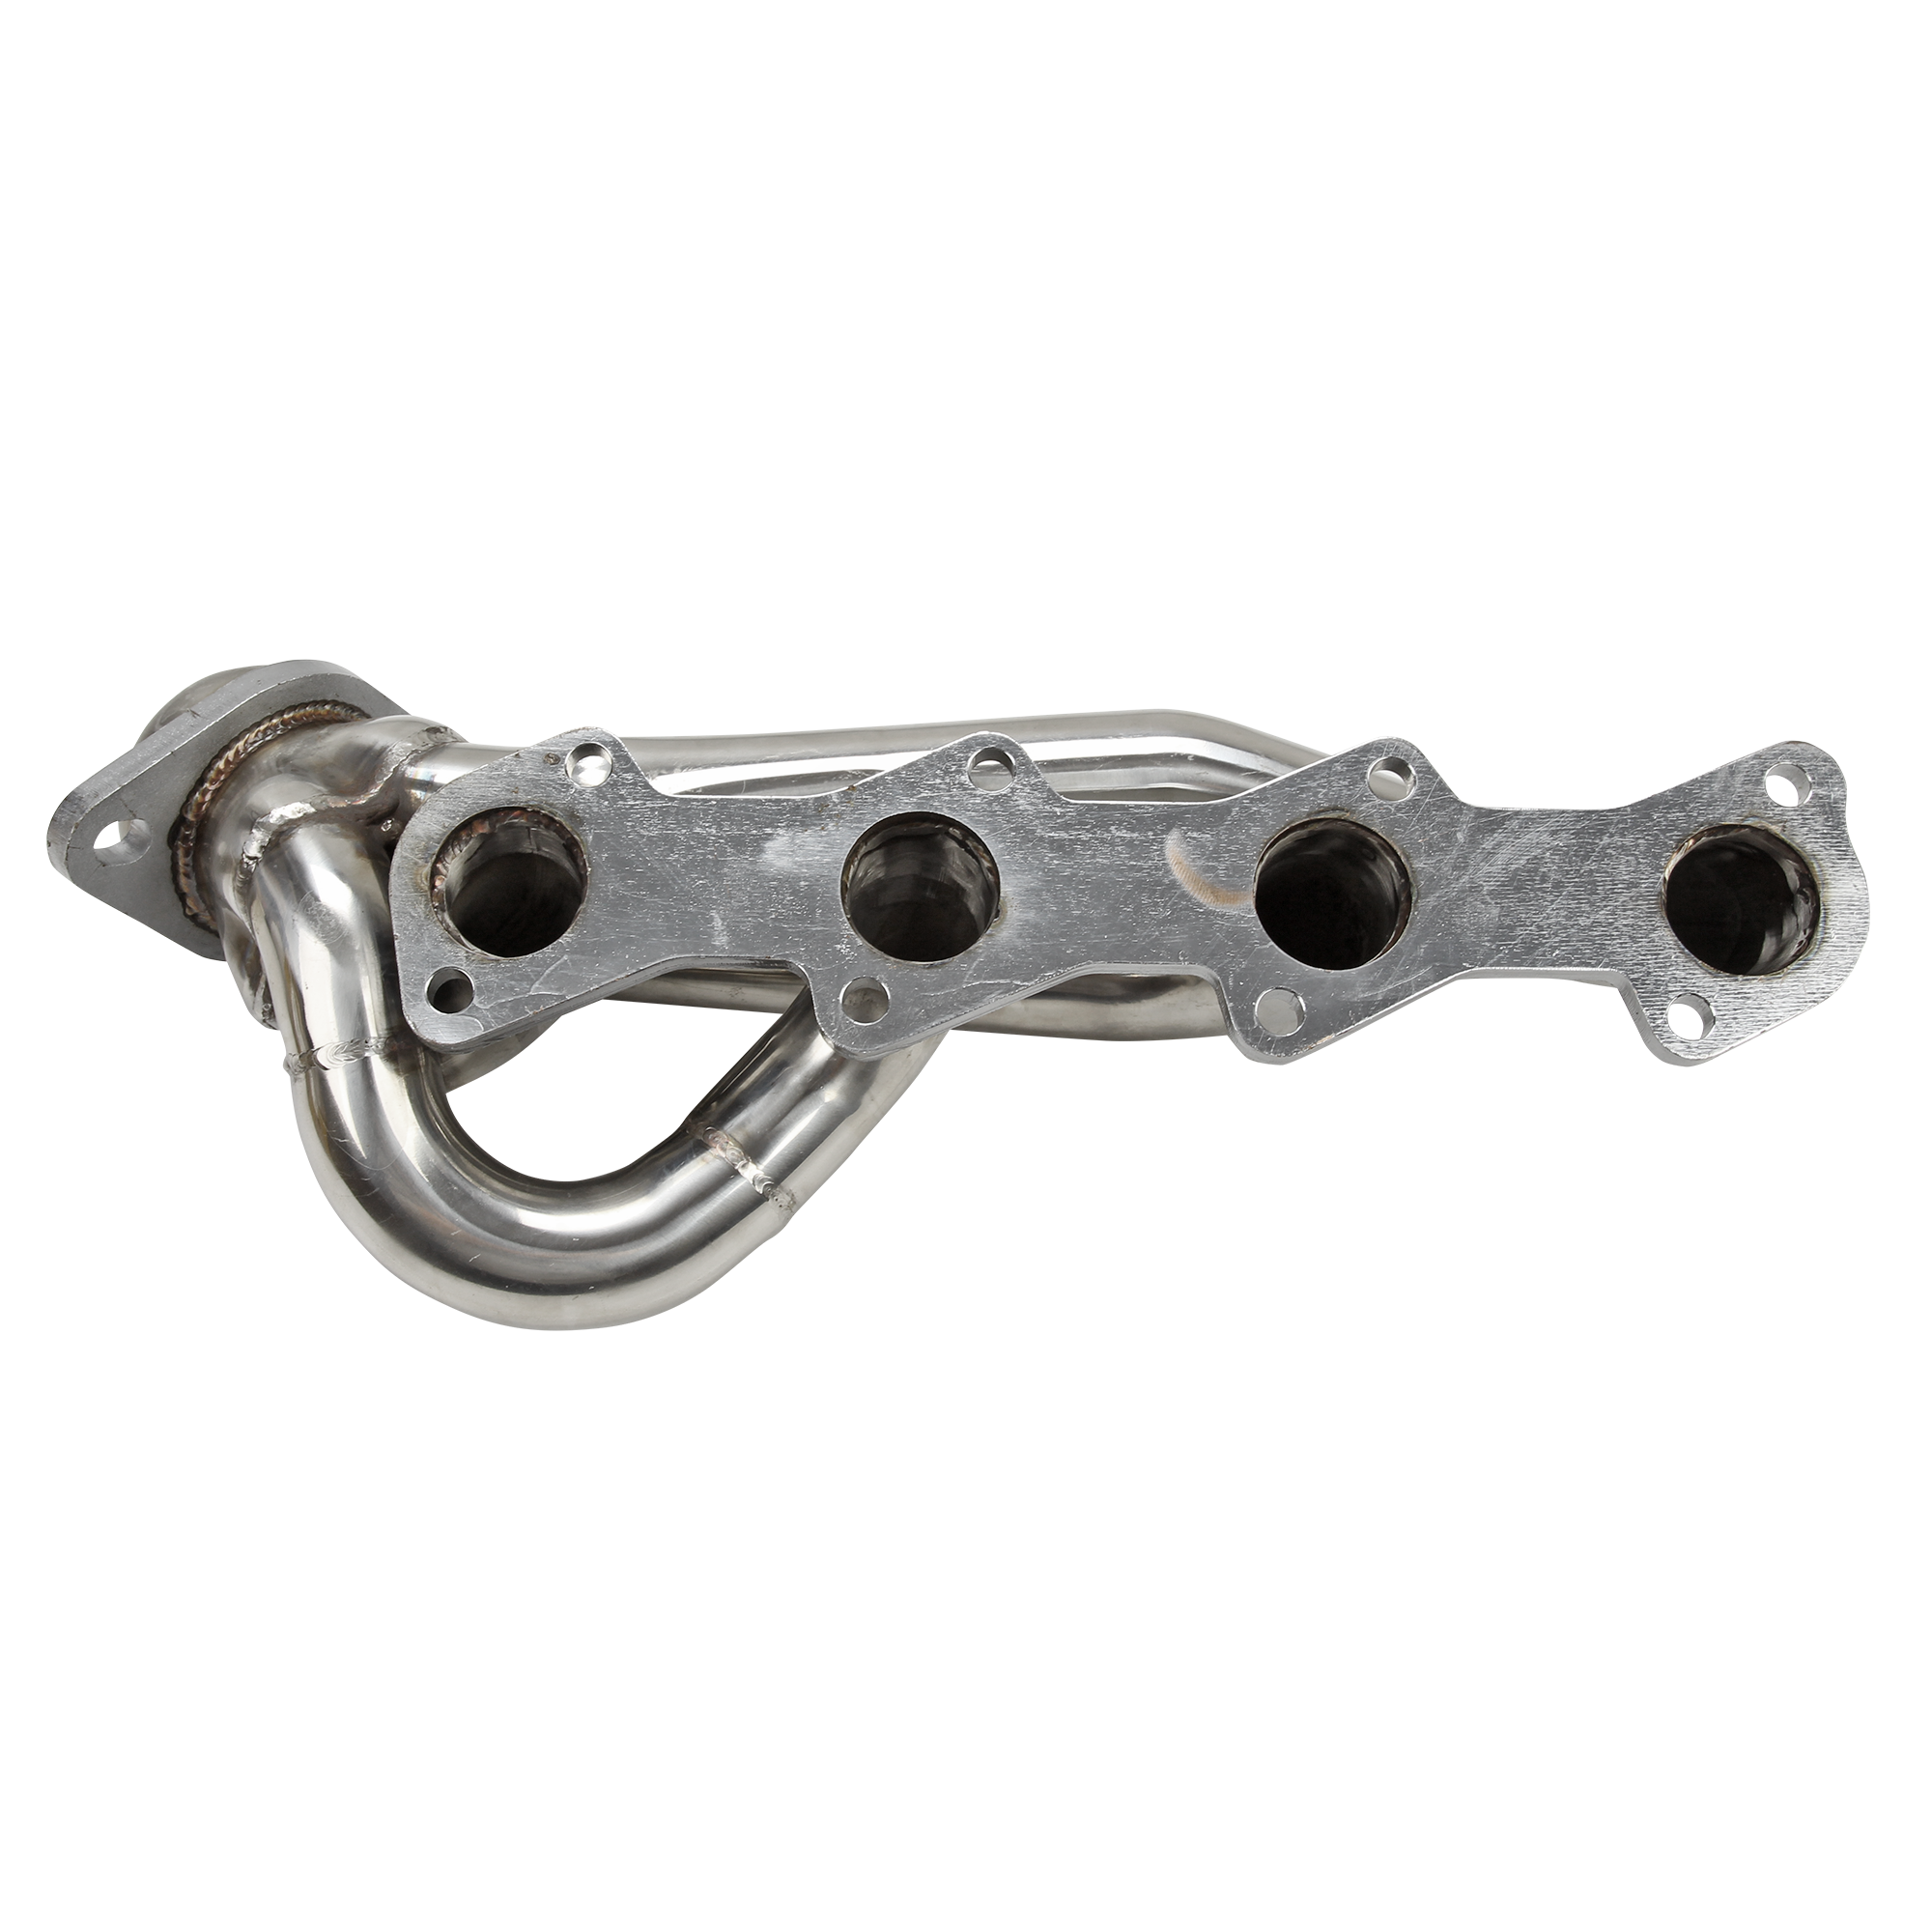 99-04 F250/f350/f450 Super Duty V10 Exhaust Header 00 For Ford 97-01 F150 F250 5.4l V8 97-03